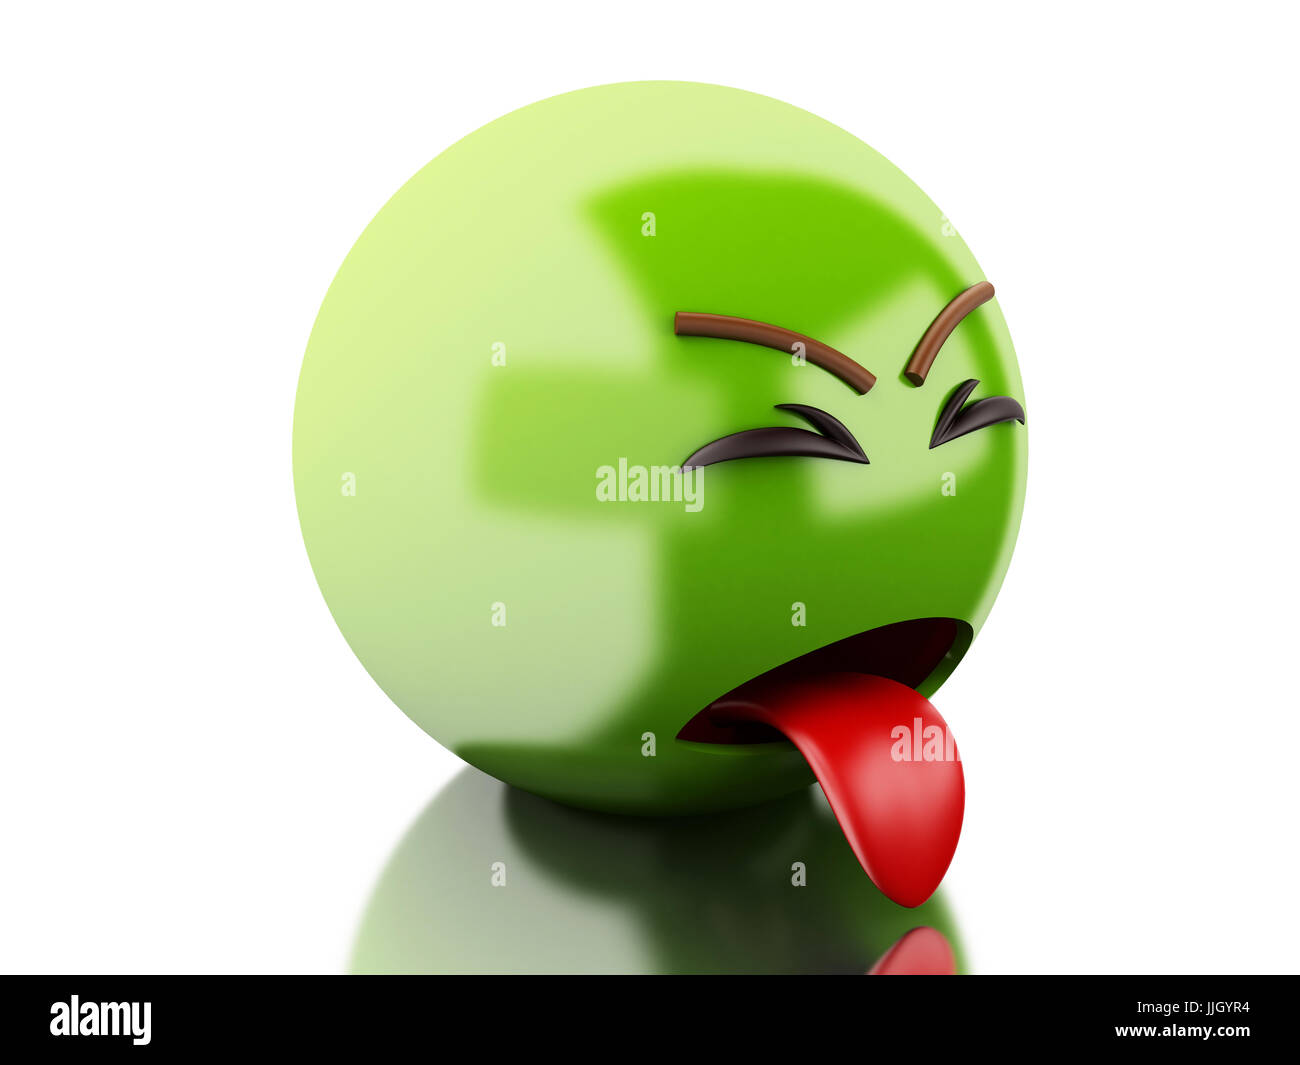 3d illustration. Sick emoticon with tongue out. Isolated white background Stock Photo